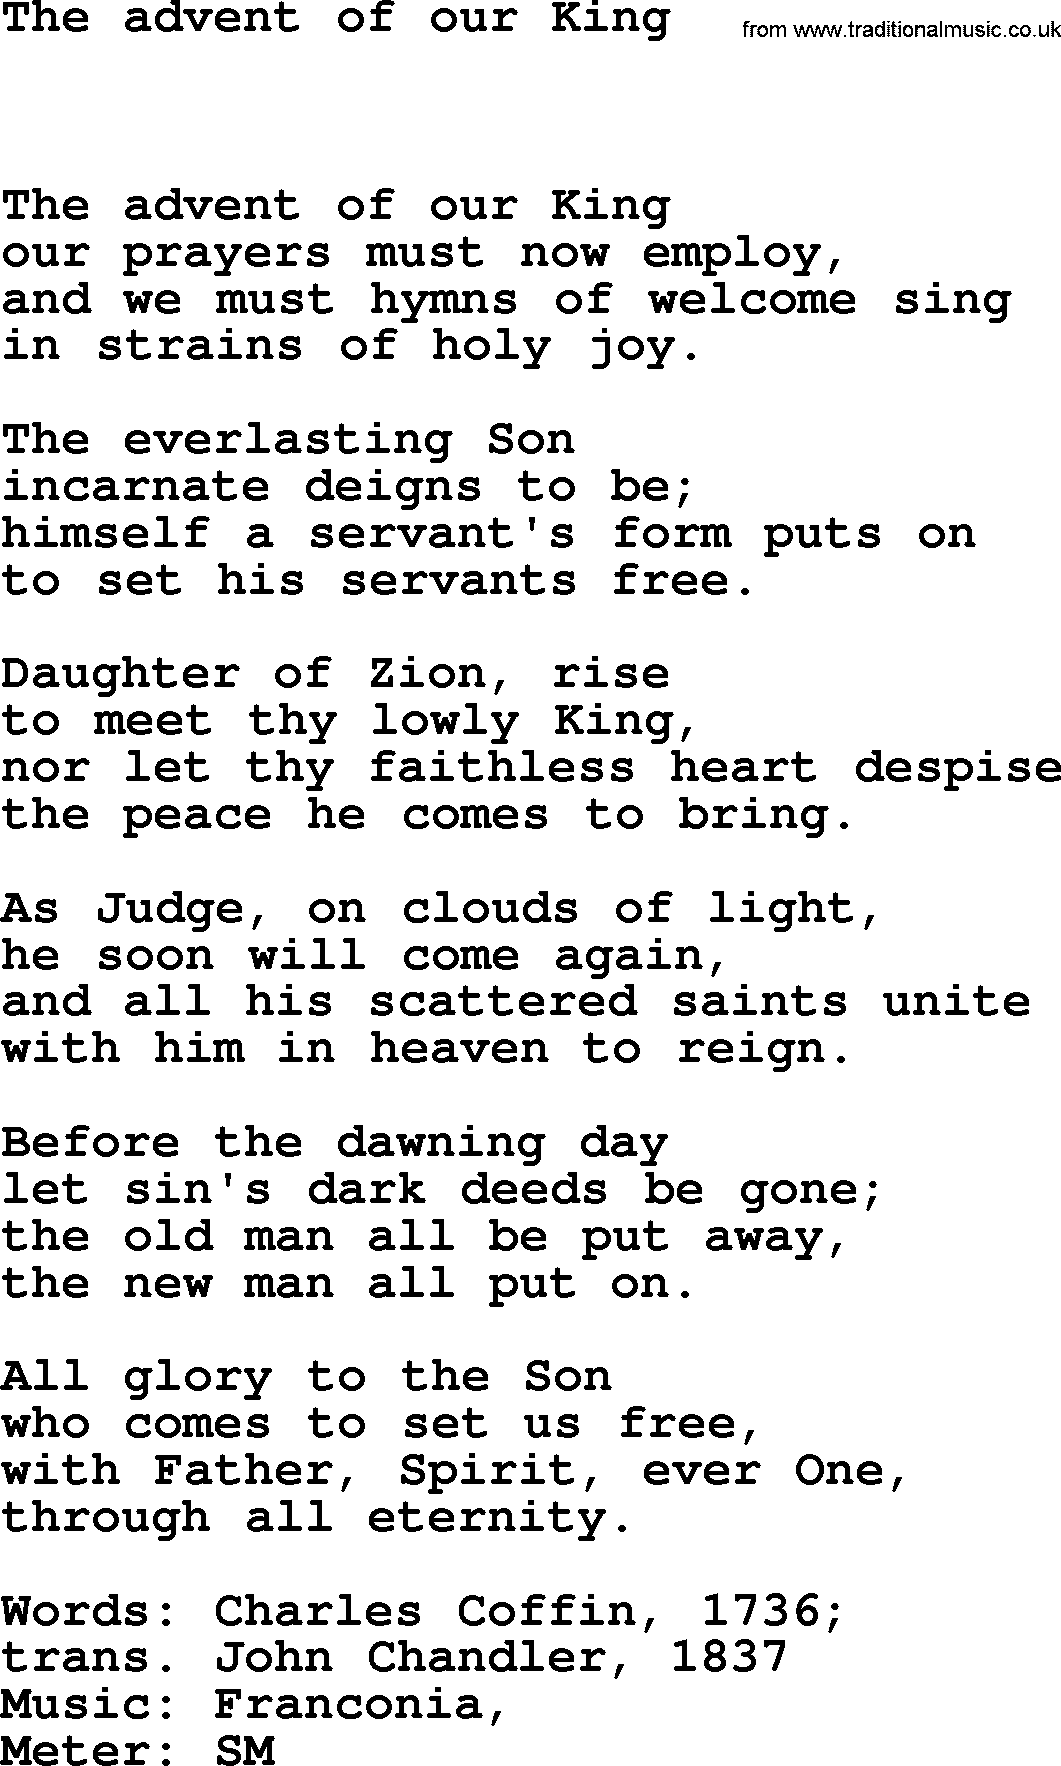 Book of Common Praise Hymn: The Advent Of Our King.txt lyrics with midi music